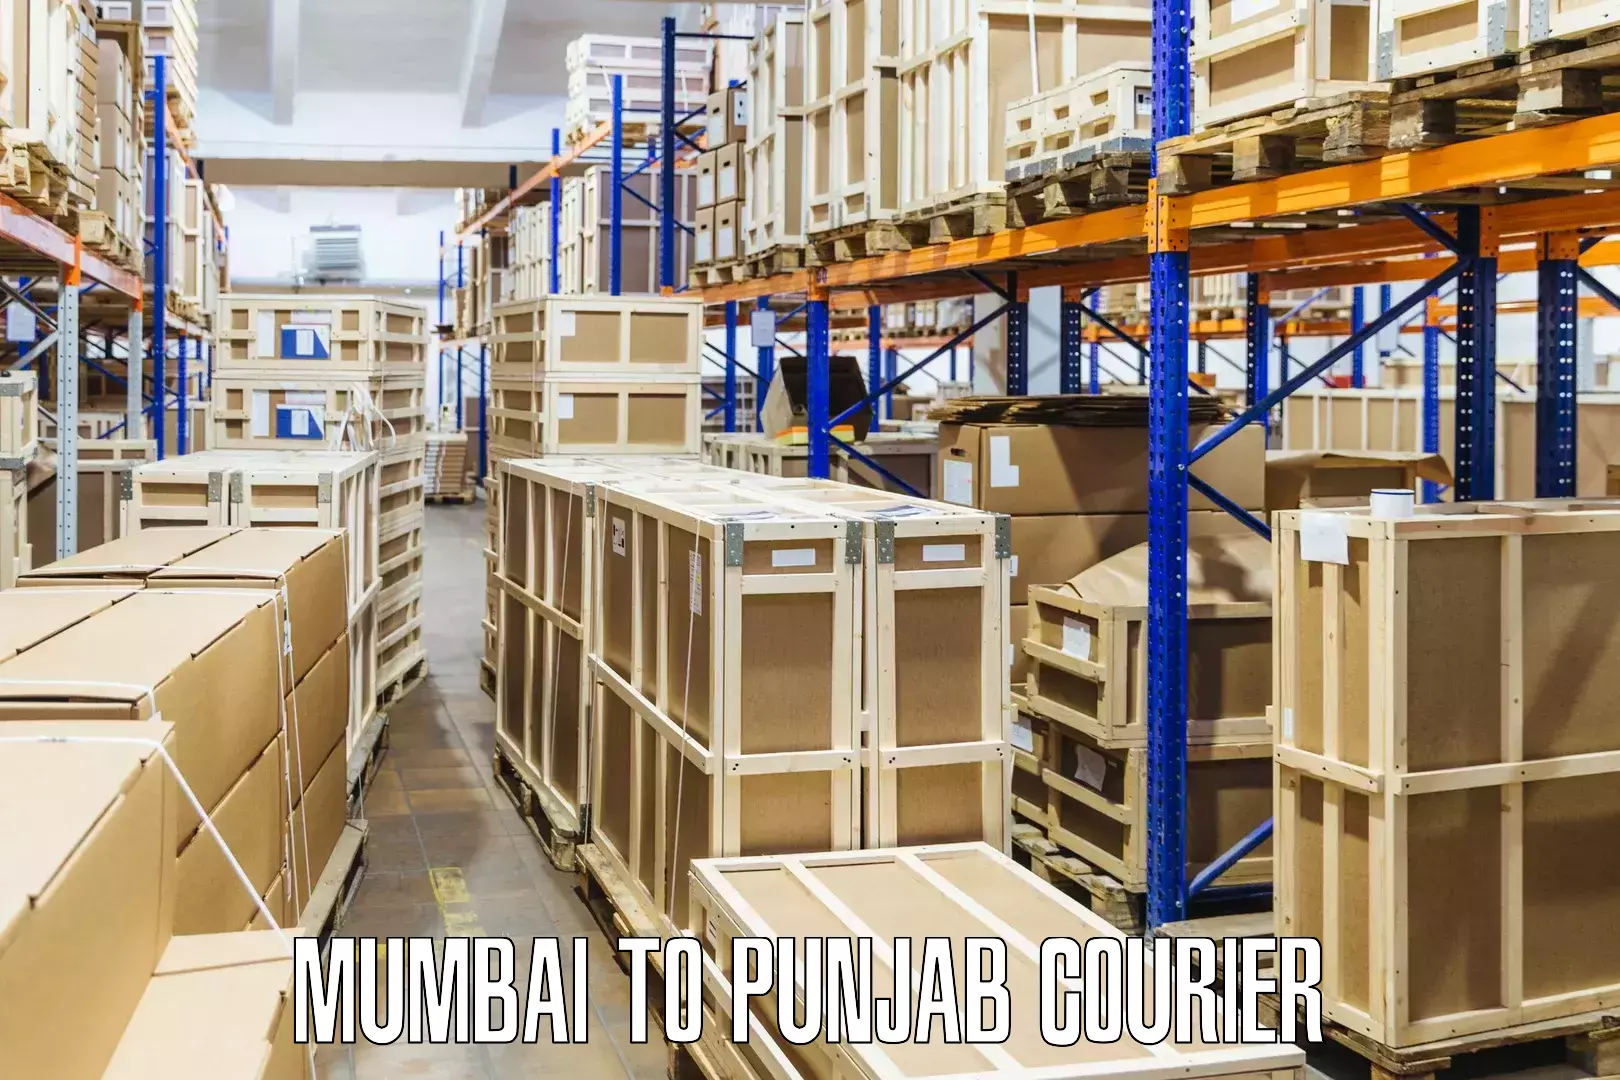 Fastest parcel delivery in Mumbai to Punjab